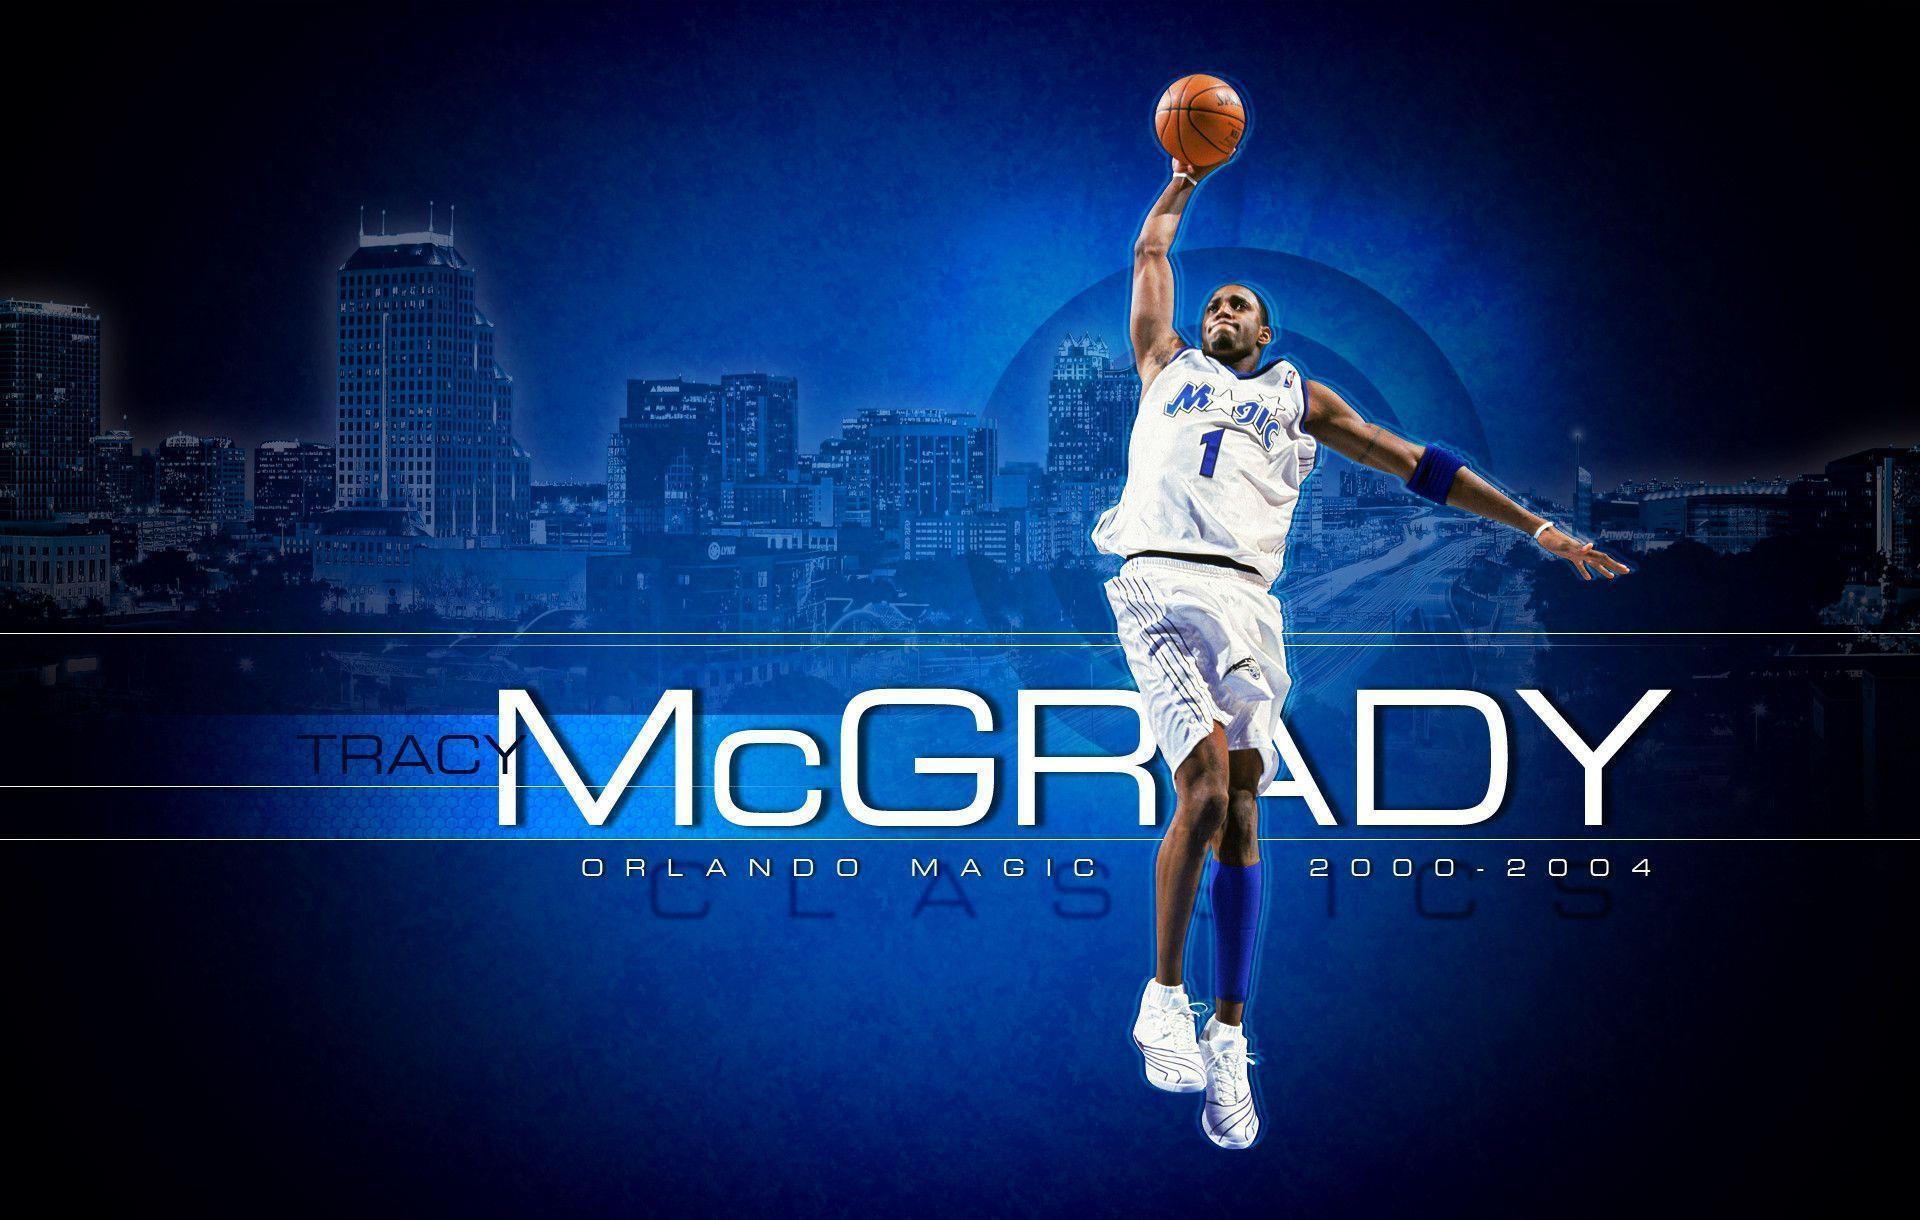 Magic Throwback Wallpaper. THE OFFICIAL SITE OF THE ORLANDO MAGIC